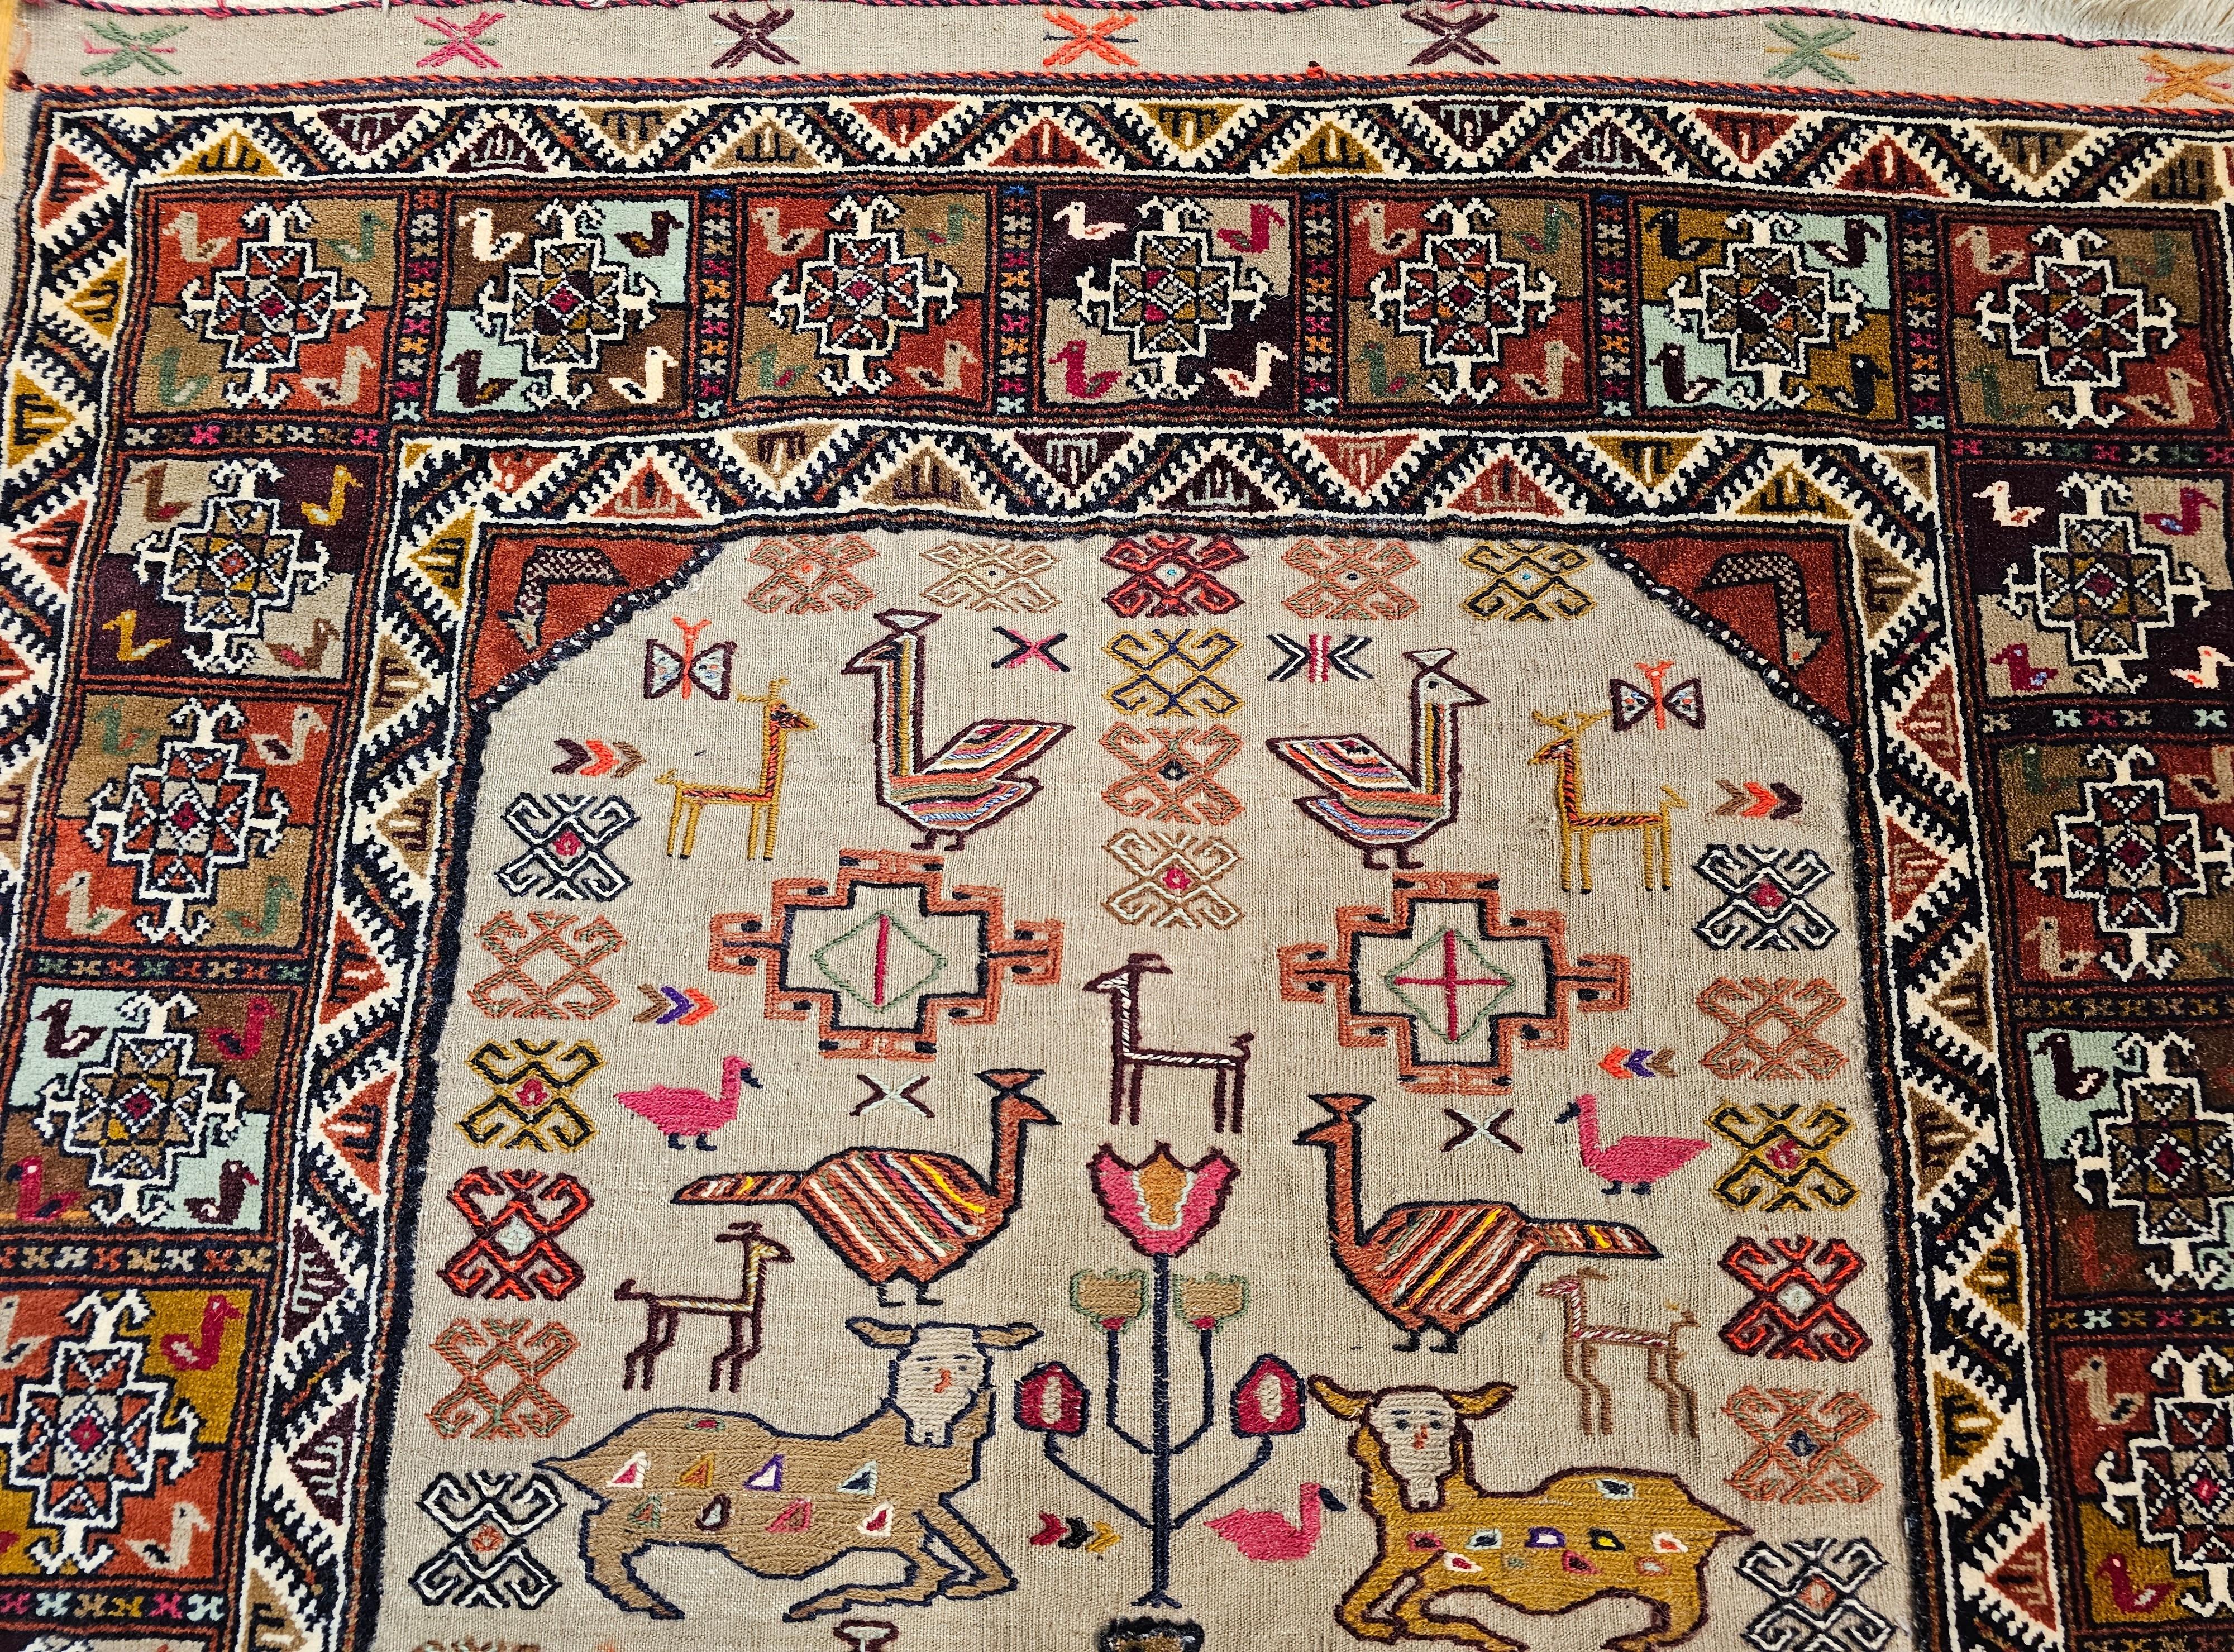 20th Century Vintage Hand-Woven Persian Qashqai Tribal Tapestry in Tree of Life Pattern For Sale